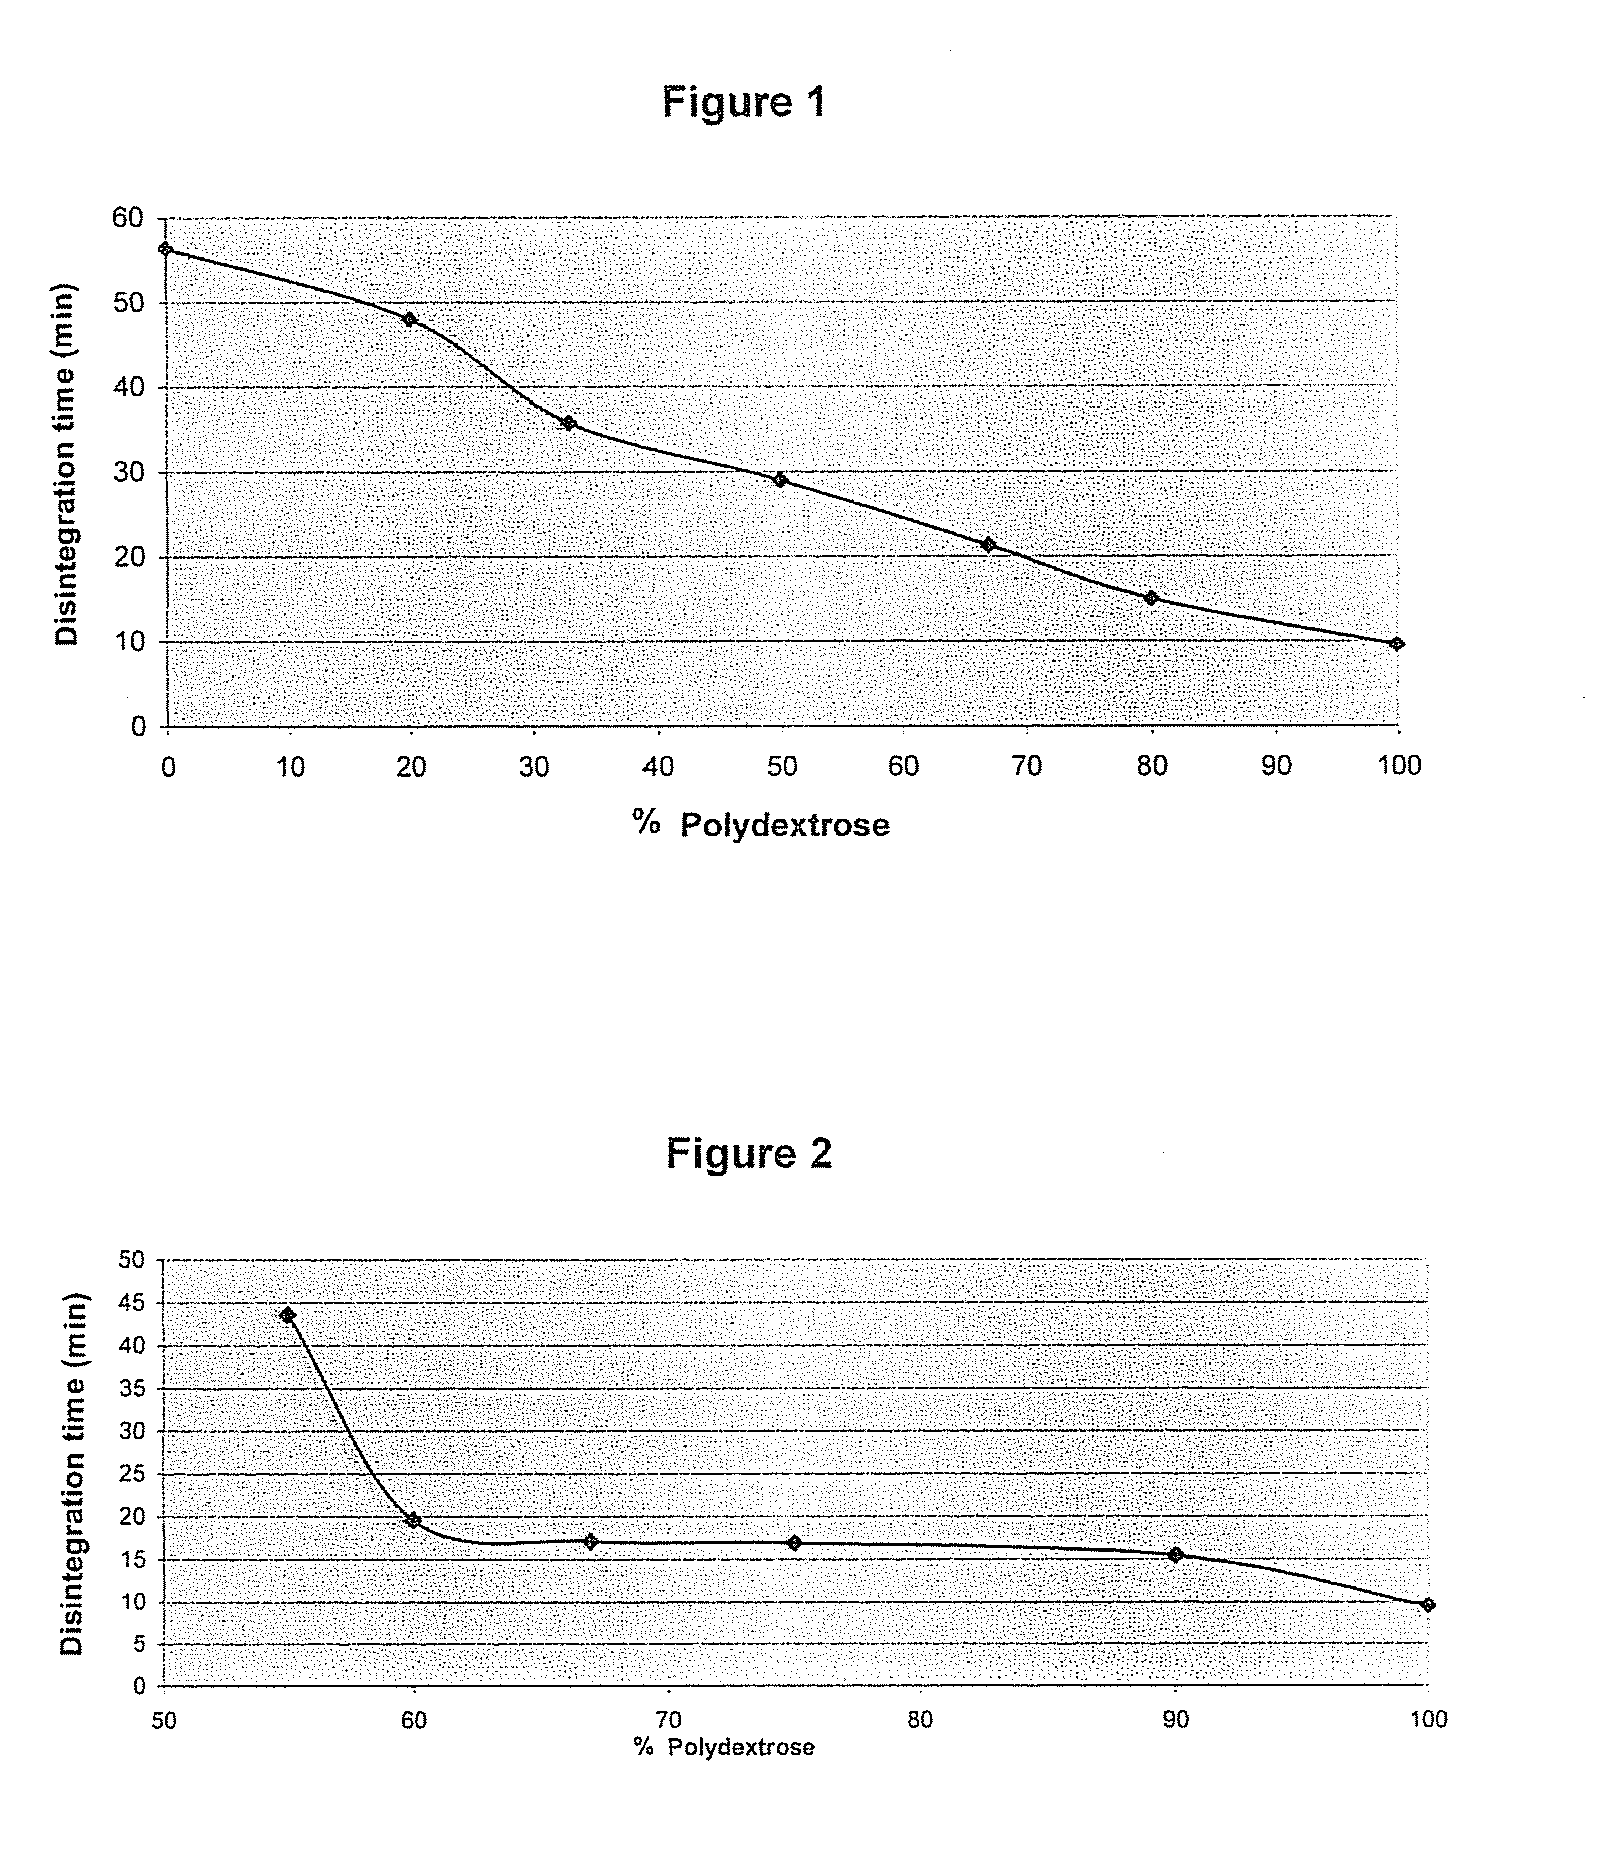 Pharmaceutical composition comprising a solid dispersion with a polymer matrix containing a continuous polydextrose phase and a continuous phase of a polymer other than polydextrose